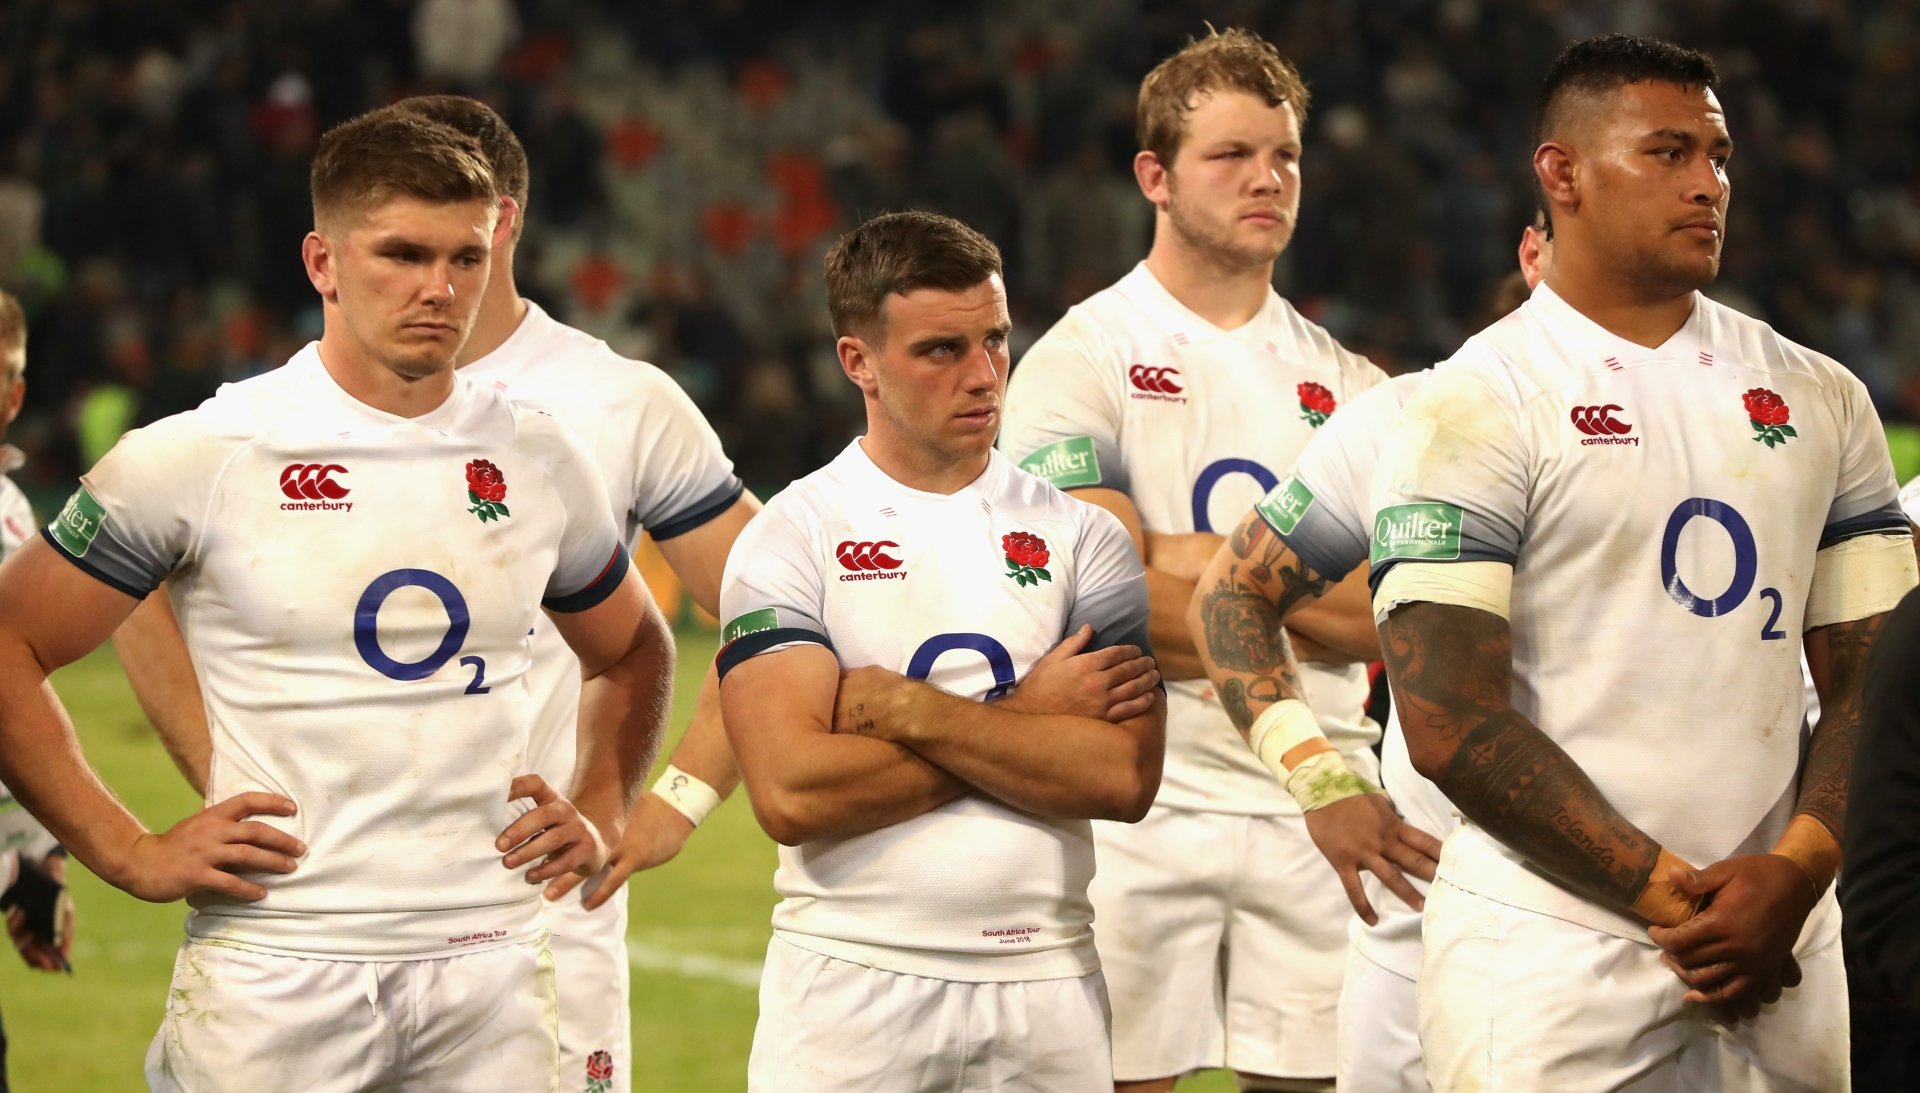 England's alarming drop in World Rugby rankings as Wales make leap